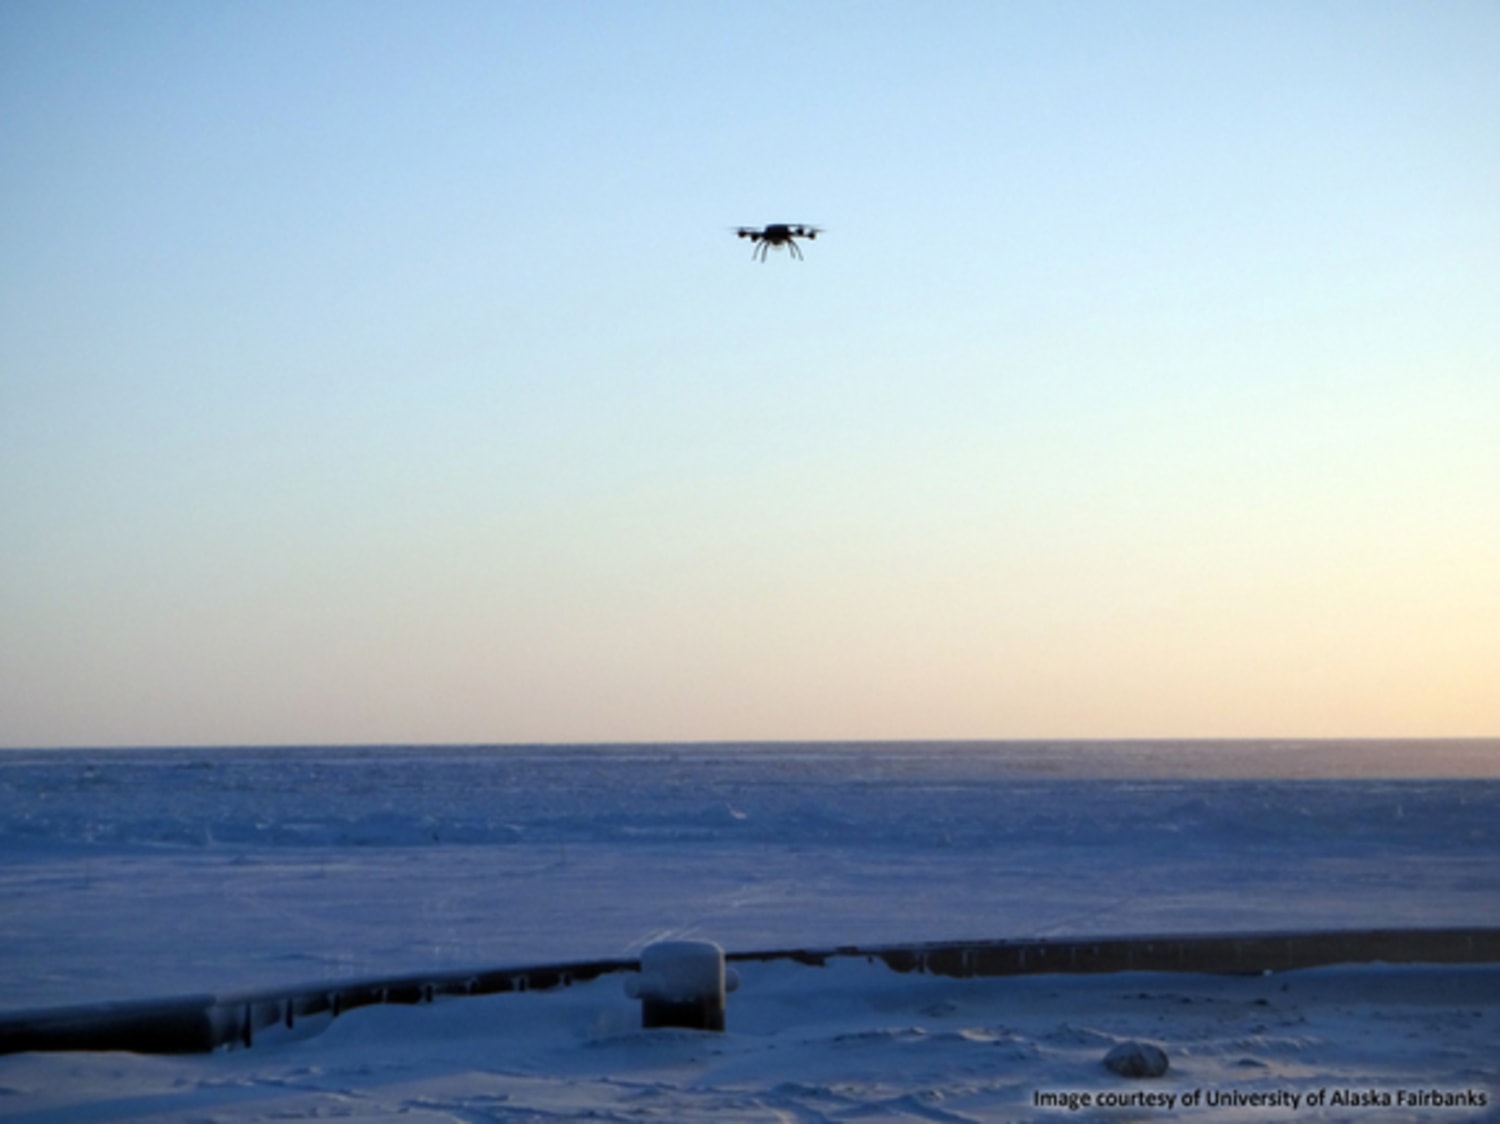 Drones handle all kinds of work in Arctic -- and there's more